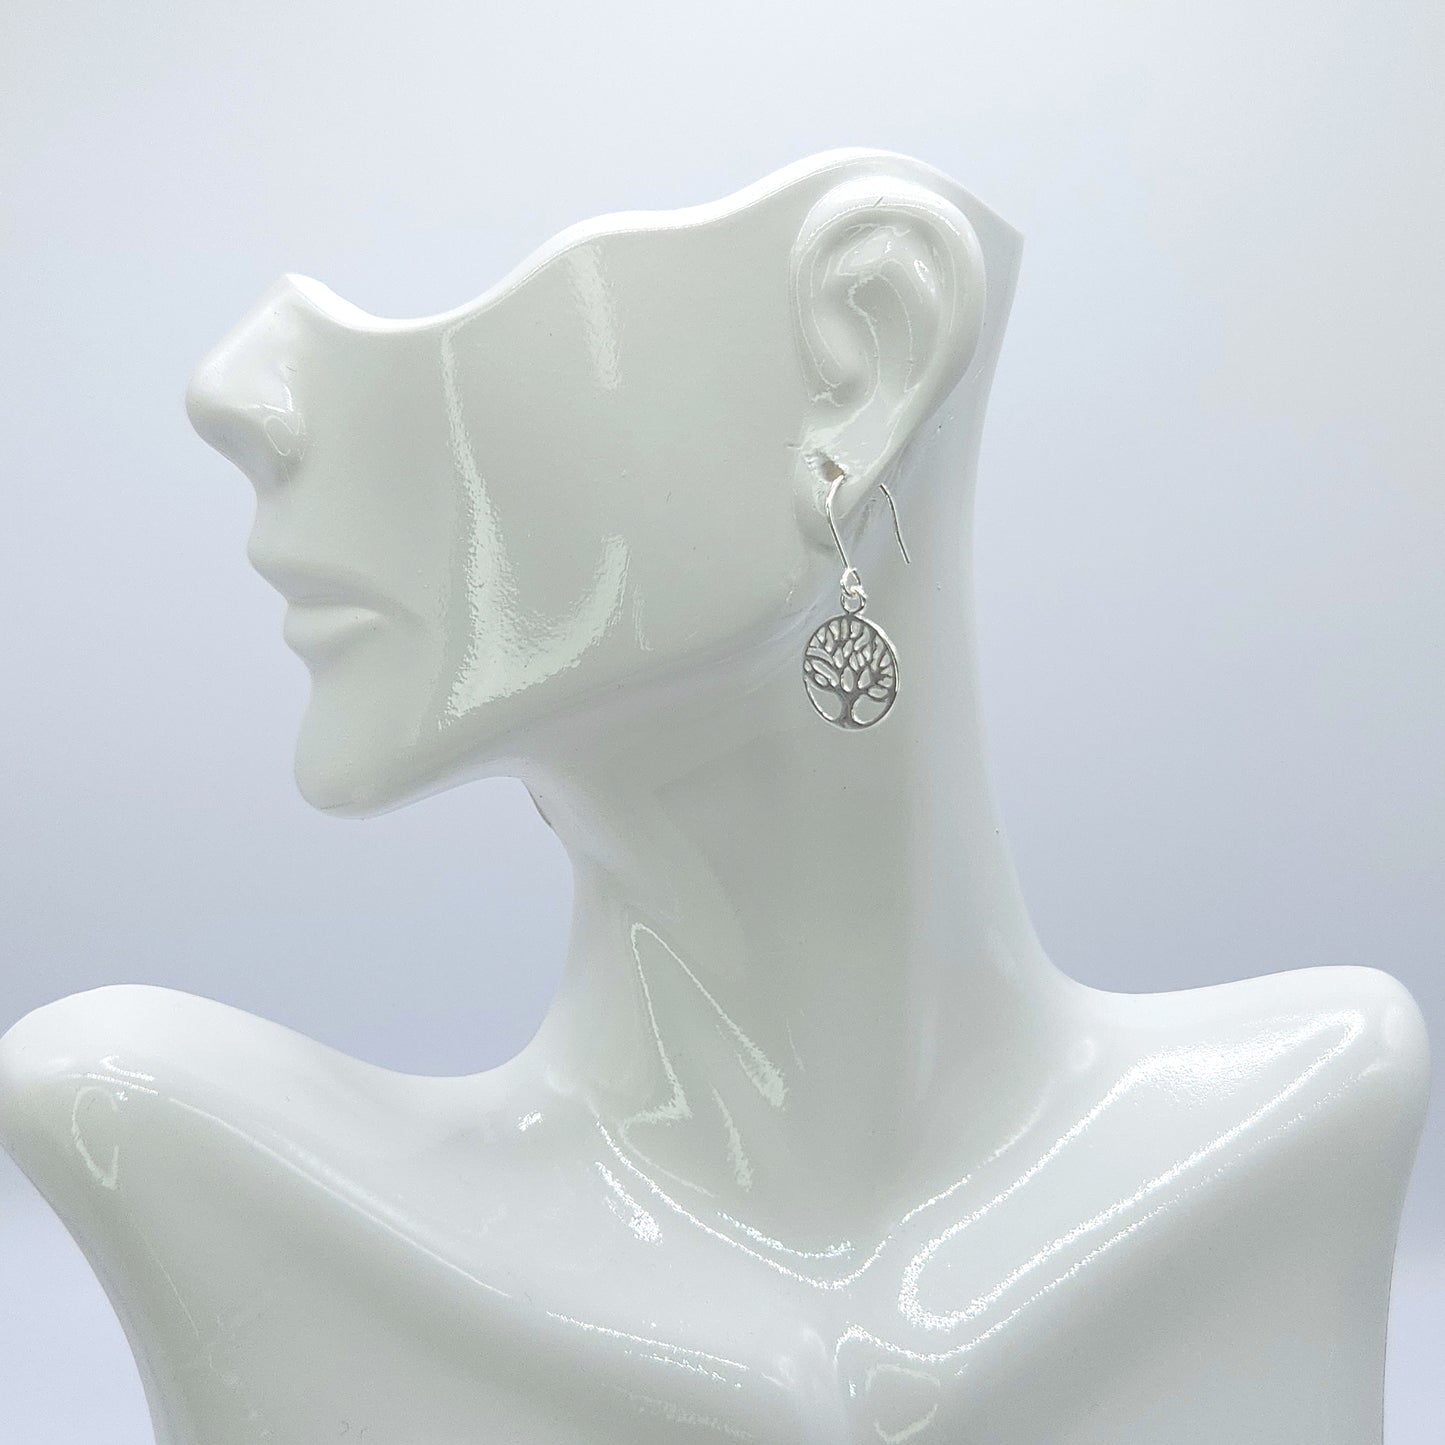 Eternal Connections: Tree of Life Earrings